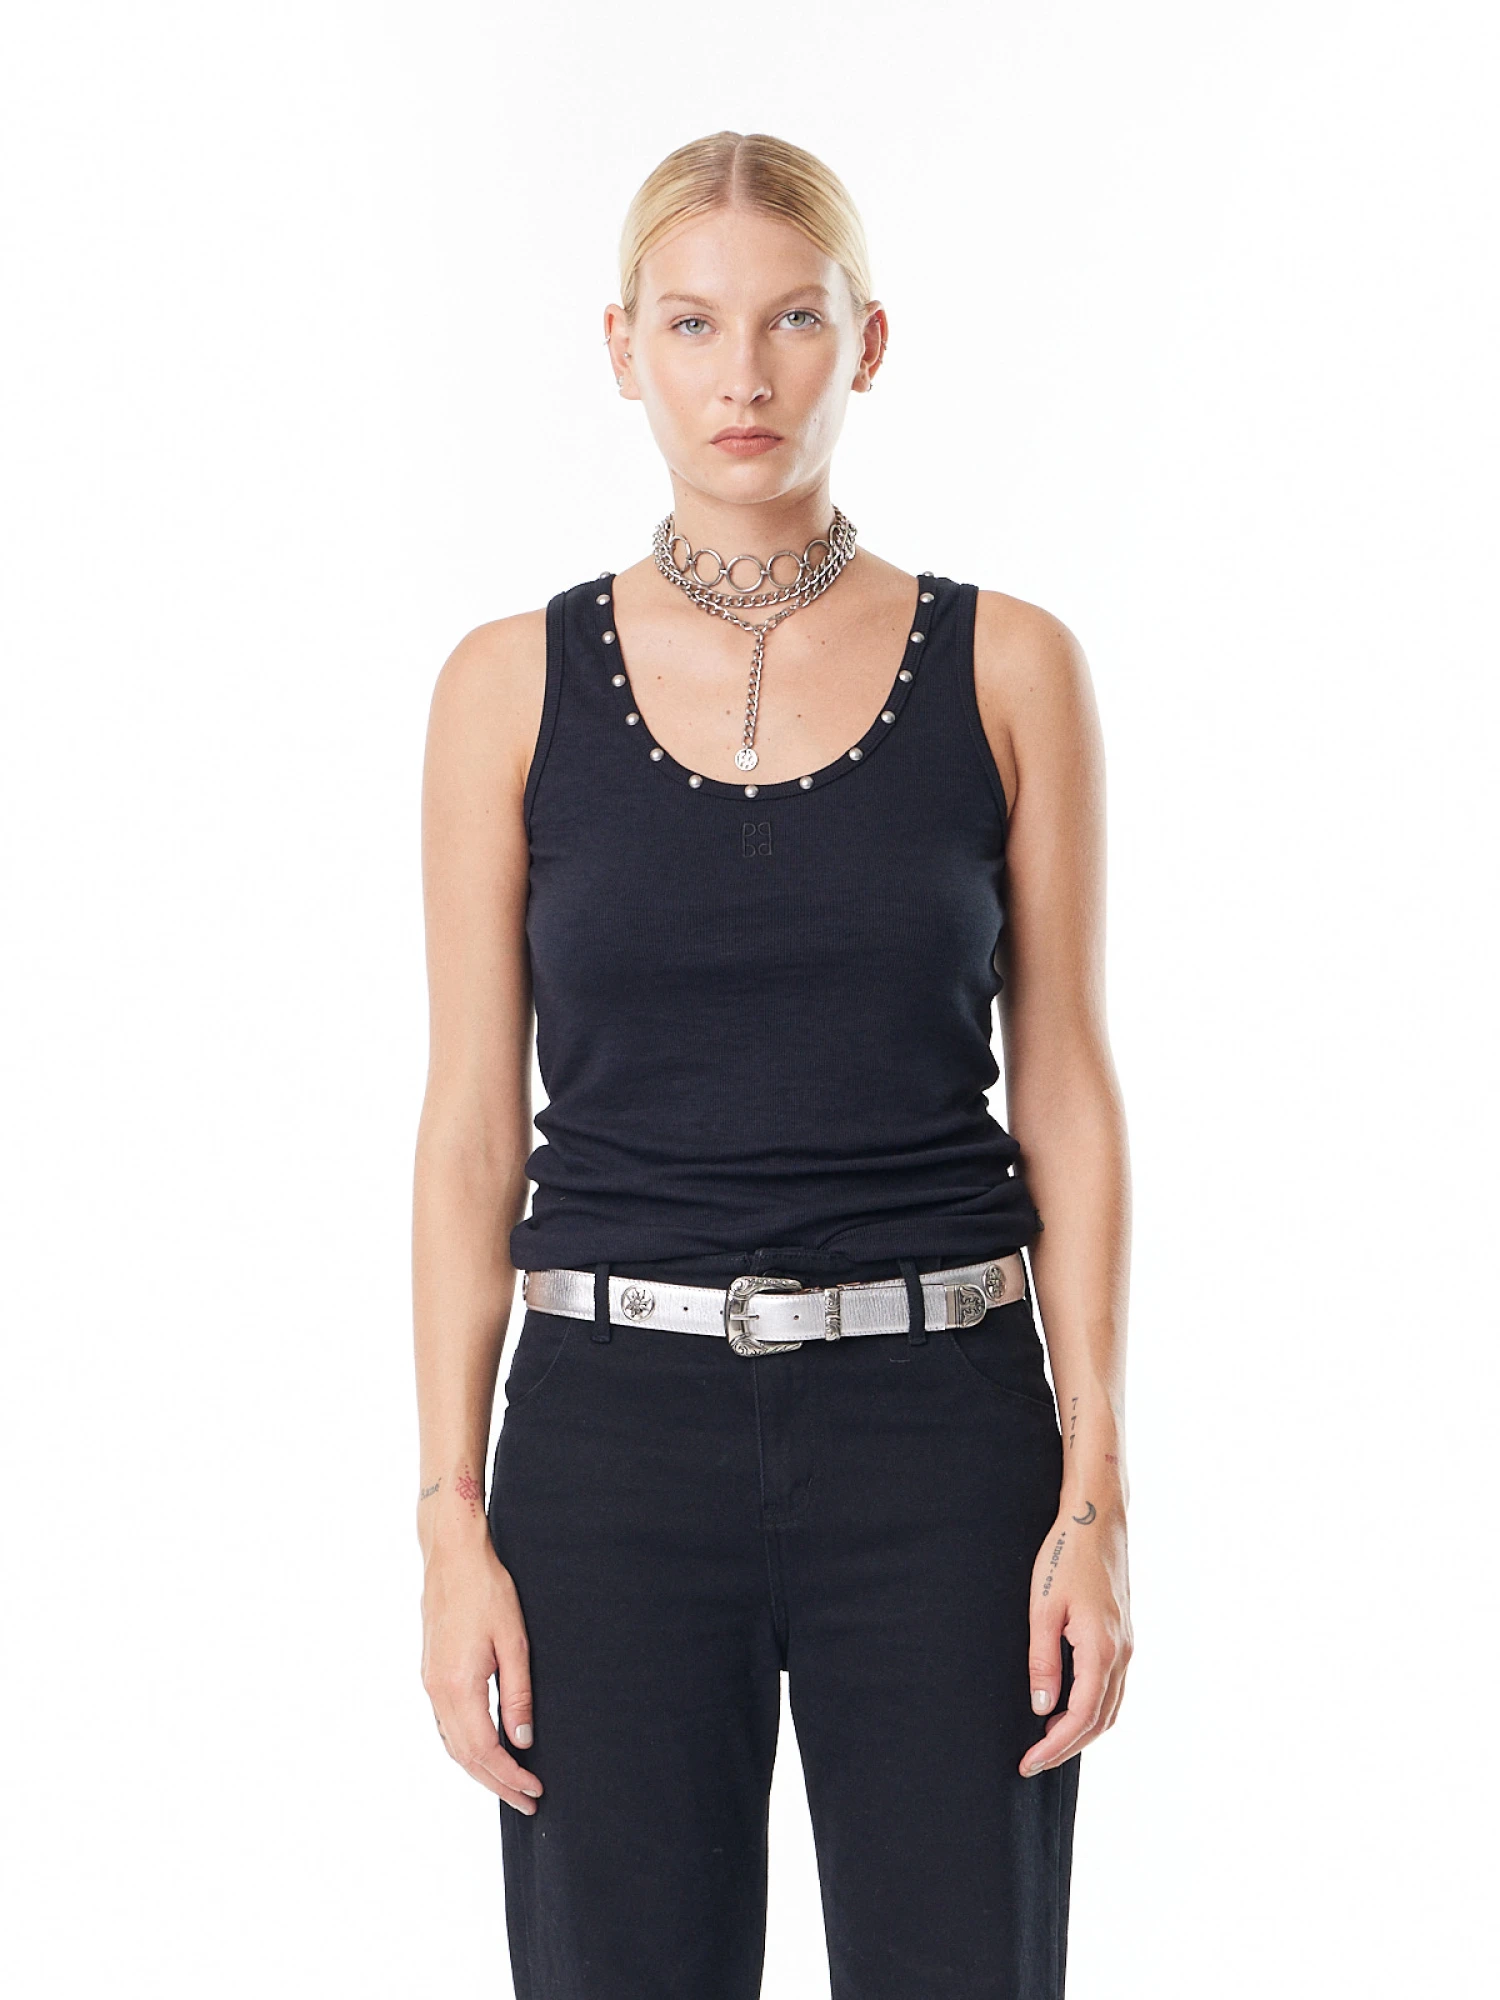 Musculosa Candy tachas negro s